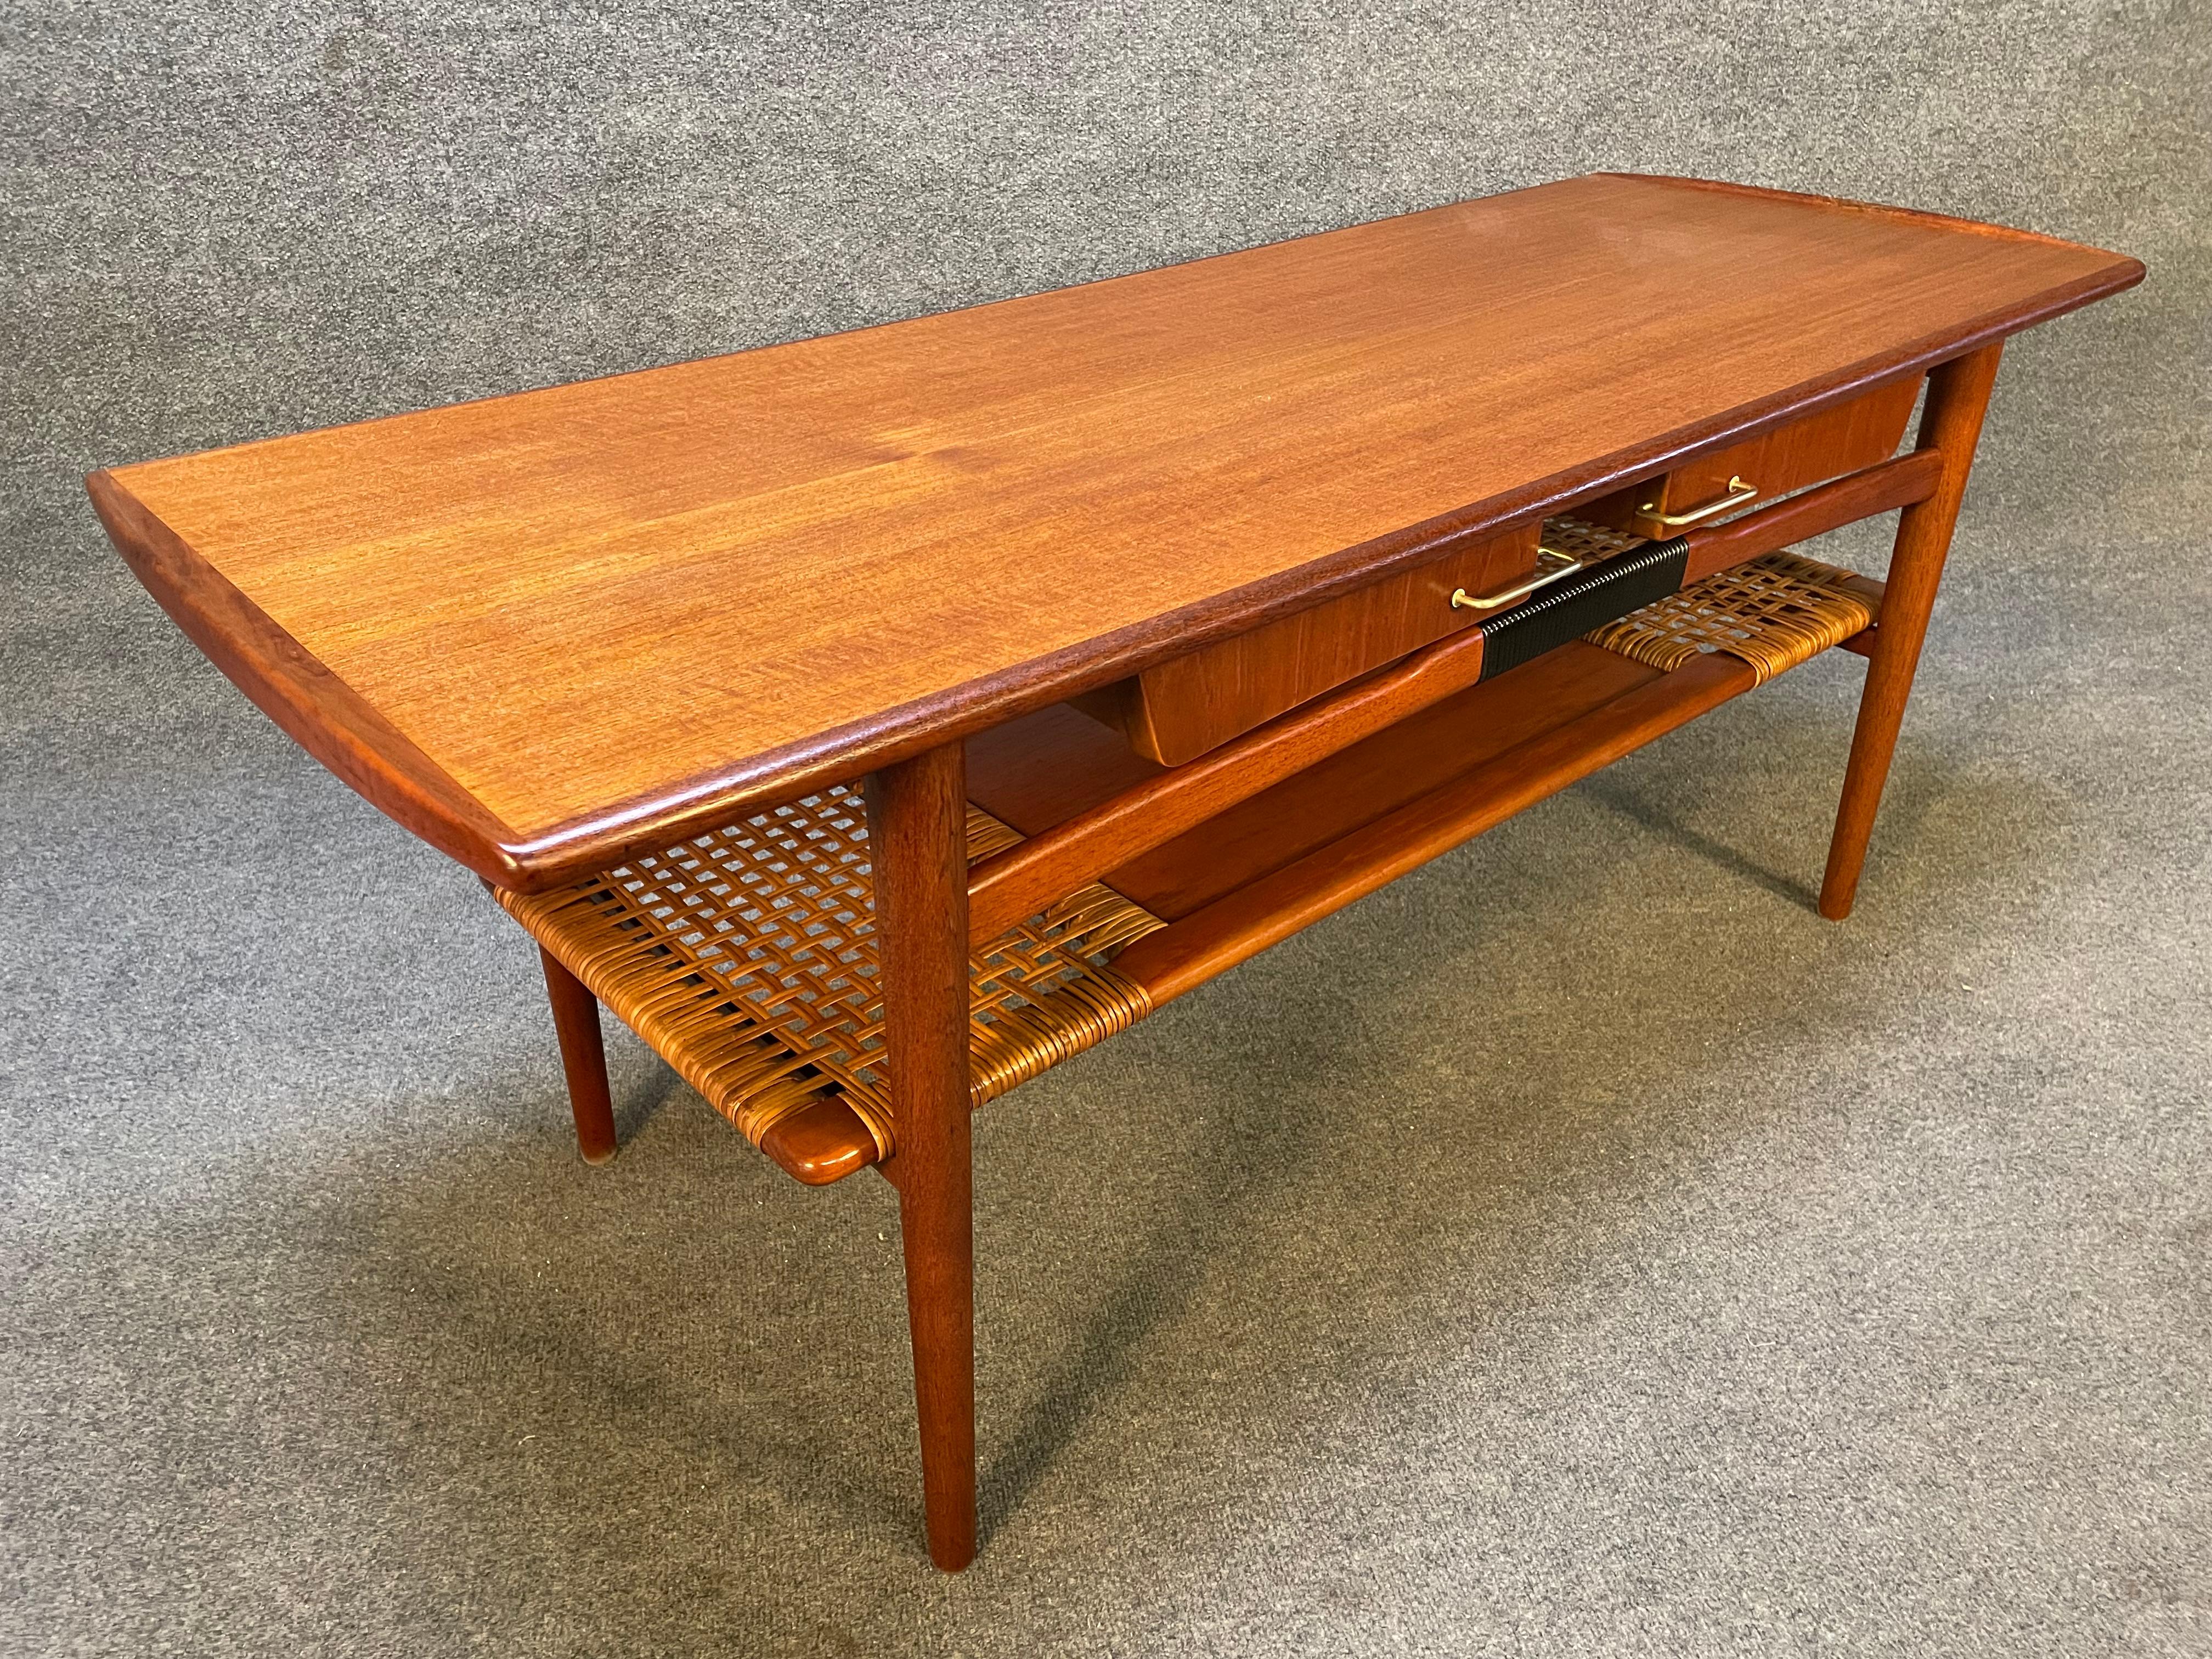 Here is a beautiful 1960's scandinavian modern teak coffee table reminiscent of Hans Wegner's design manufactured in Denmark in the 1960's.
This special table, recently imported from Europe to California before its refinishing, features a vibrant